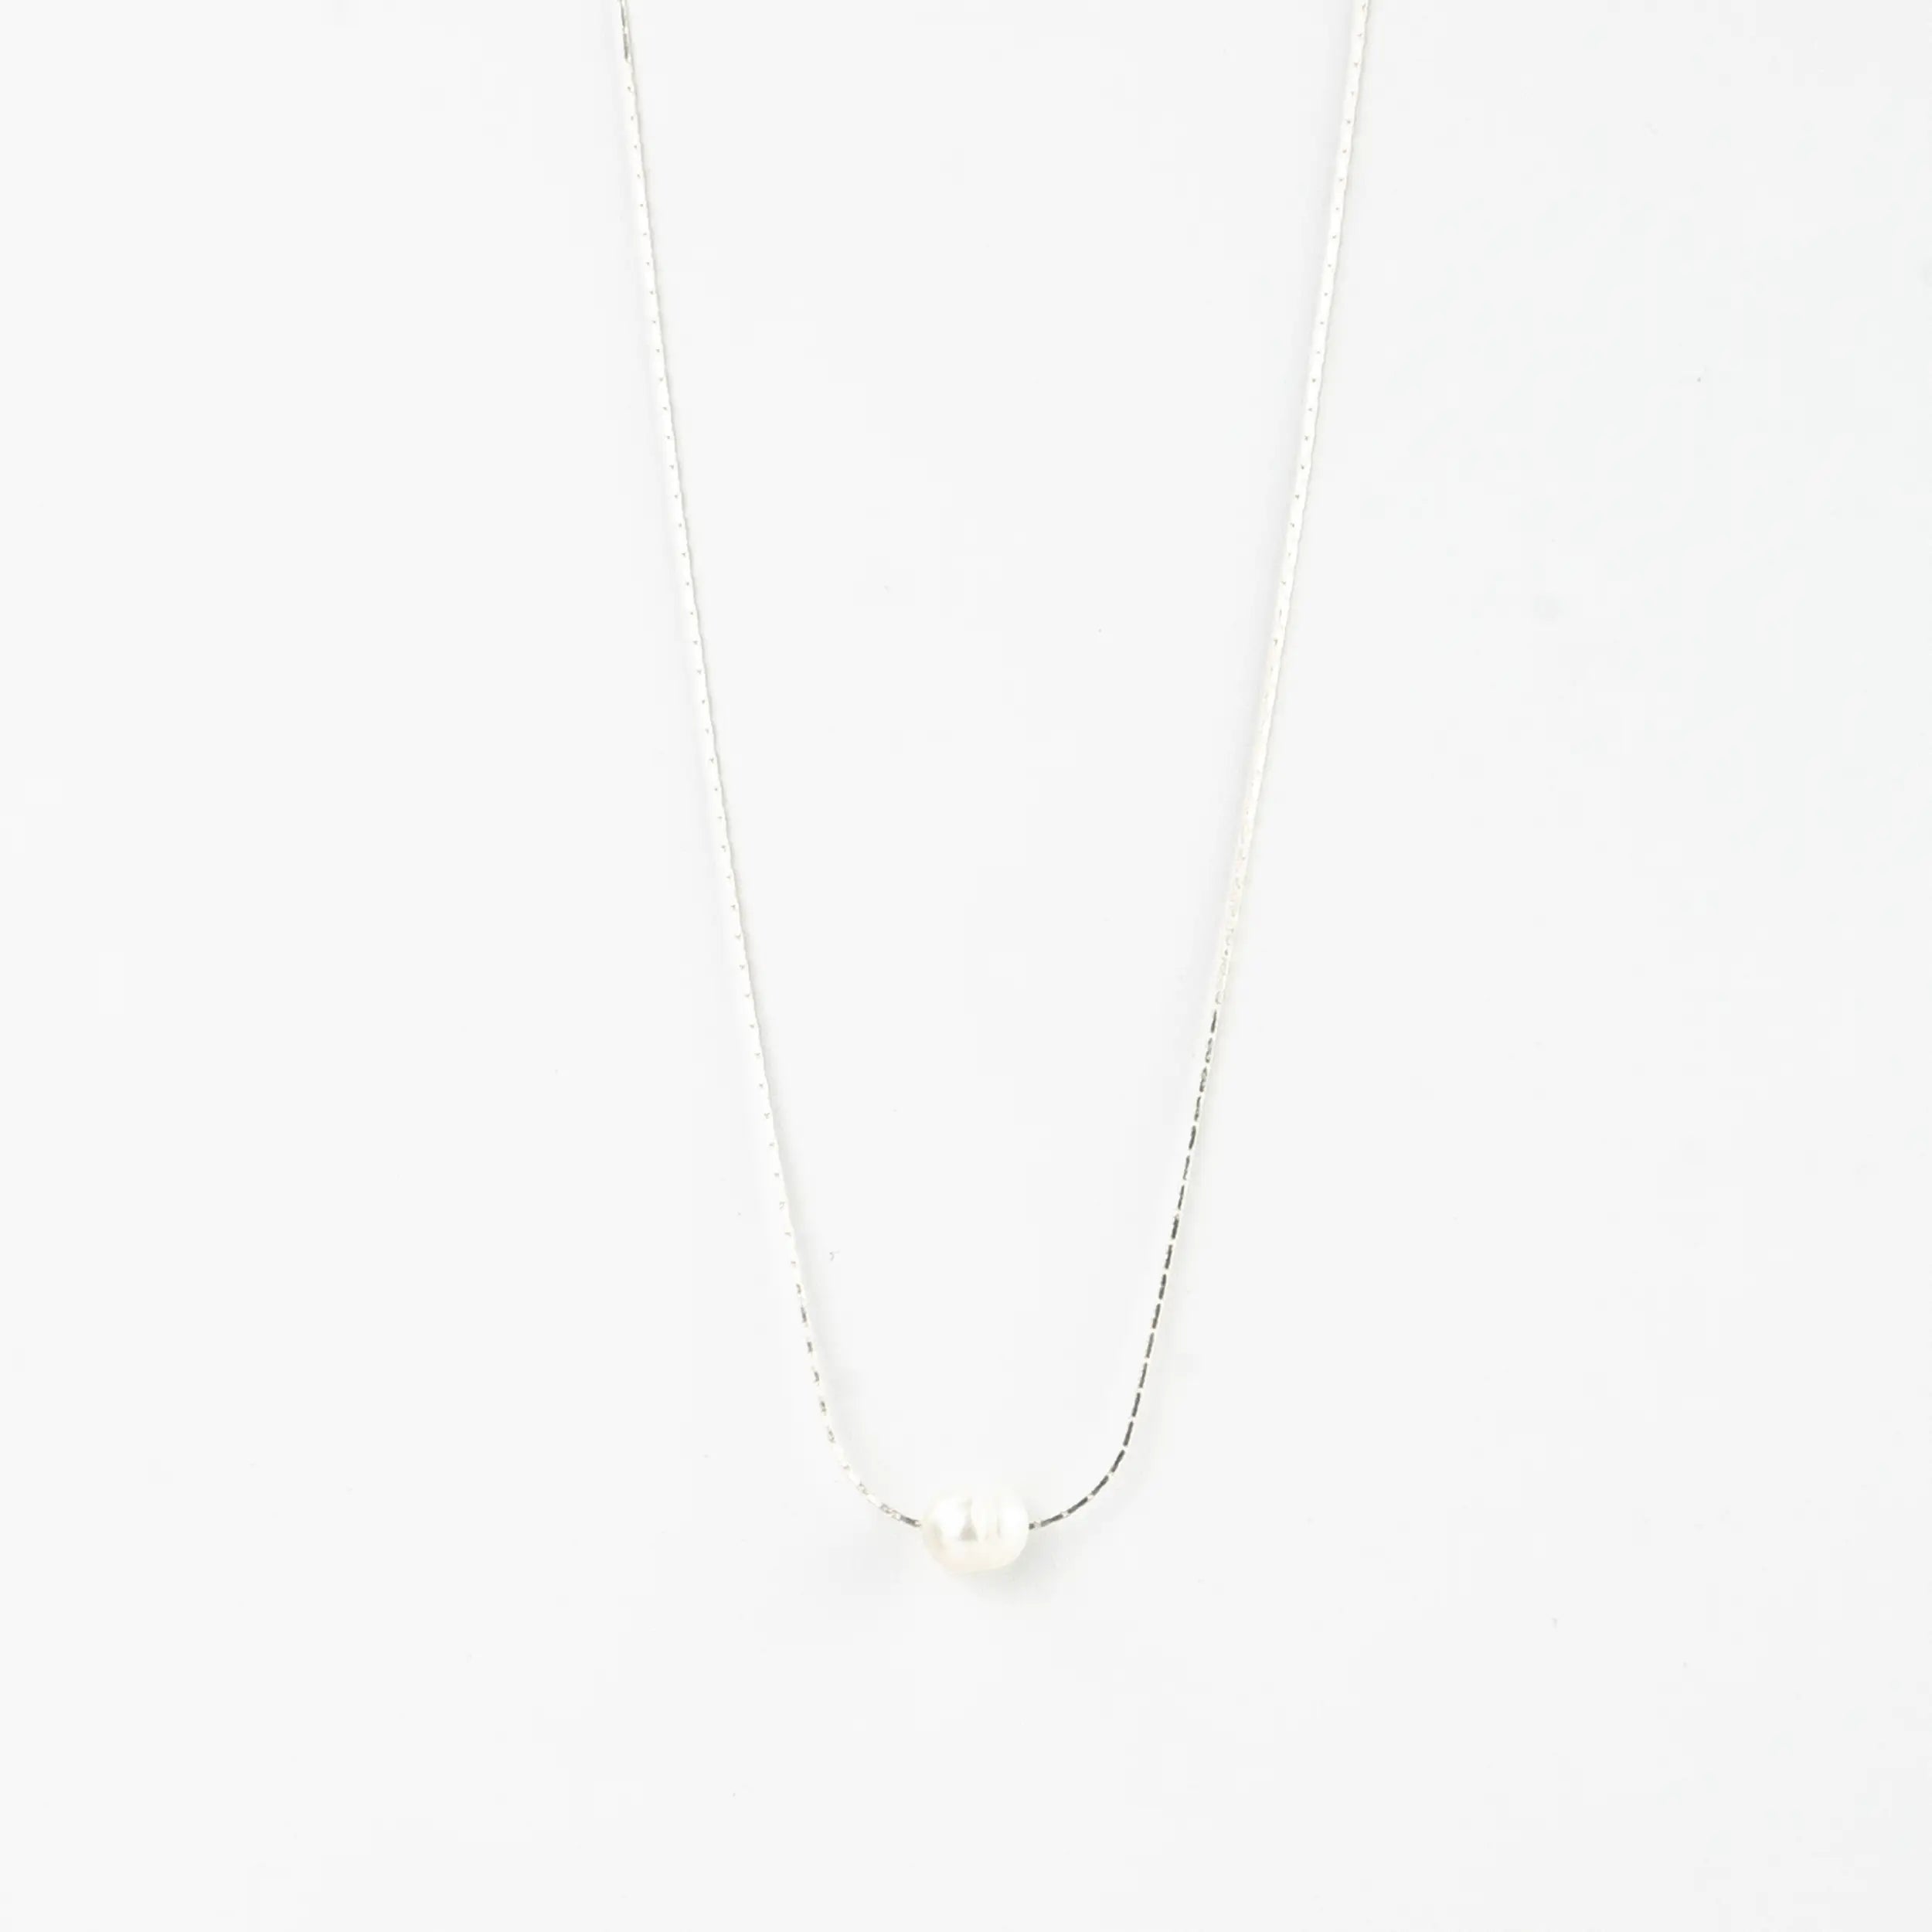 Ana Freshwater Pearl Necklace - Pineapple Island